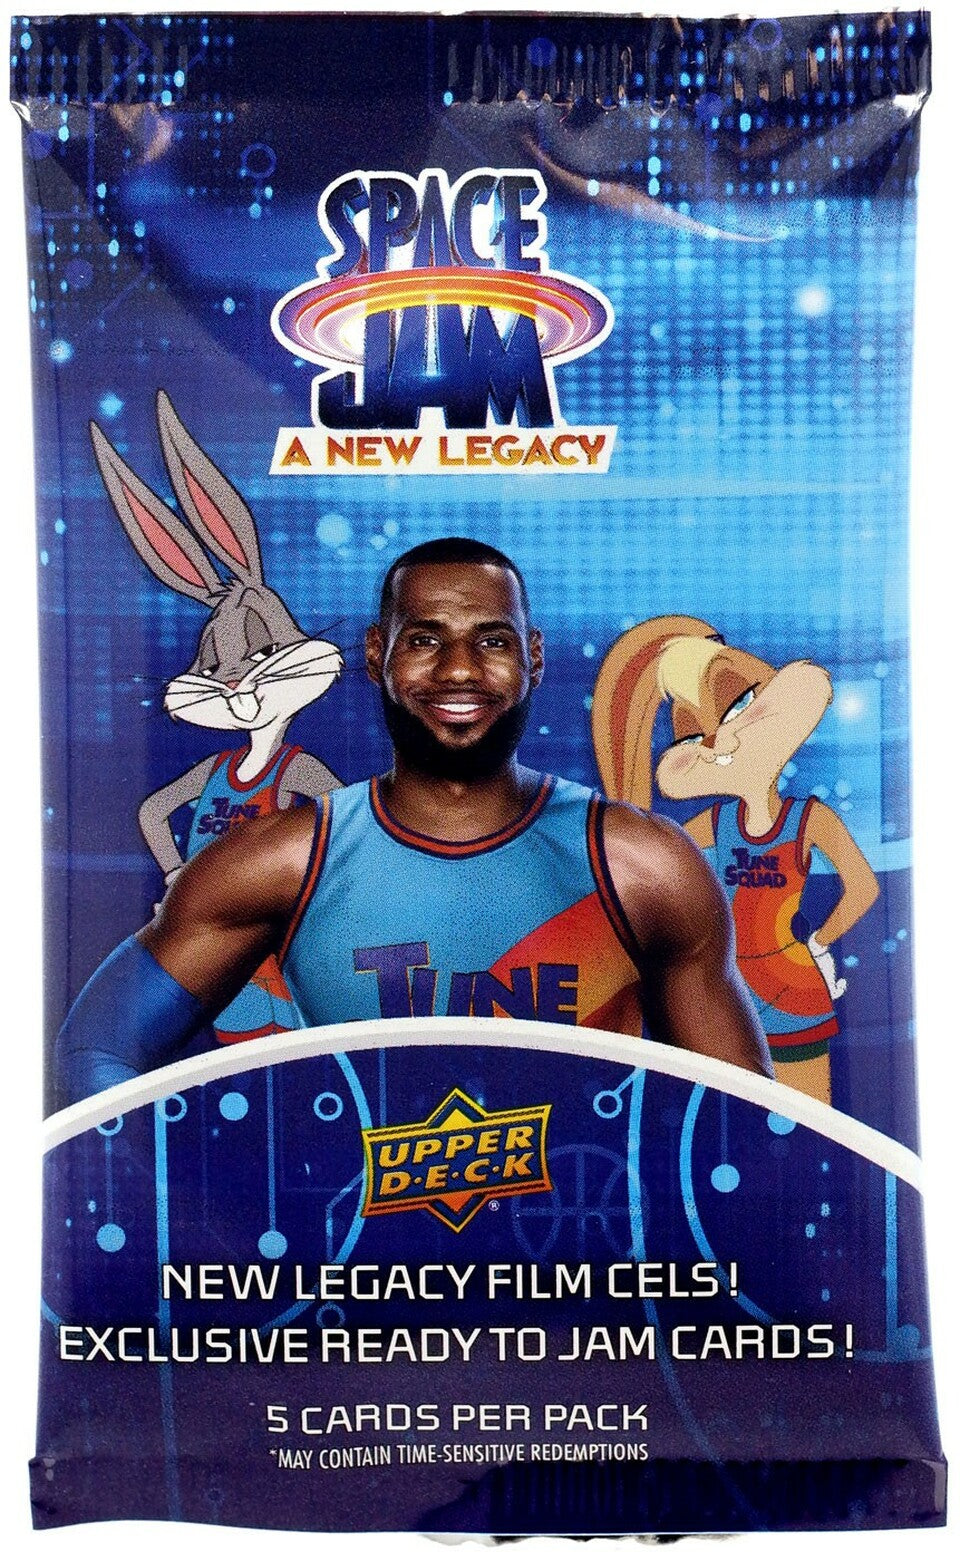 UPPER DECK SPACE JAM BOOSTER PACK (FROM BLASTER BOX) x1